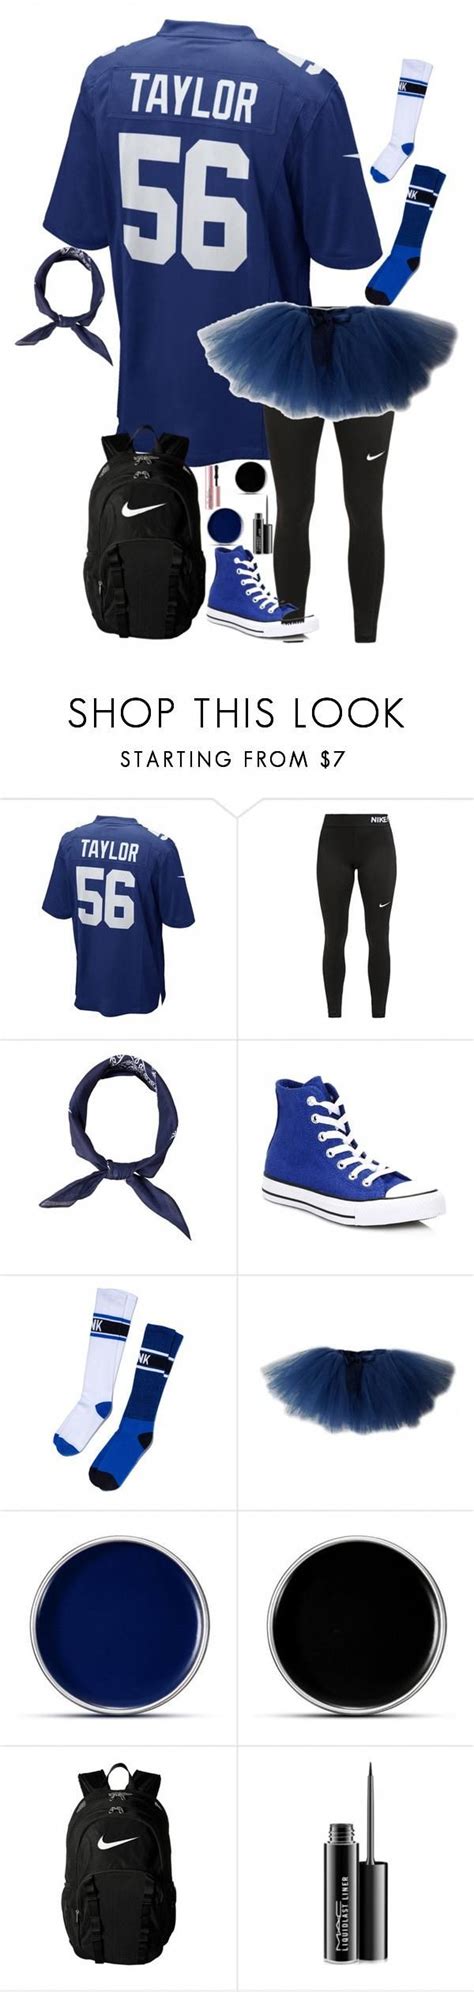 mathlete vs athlete day by taylor austinxoxo liked on polyvore featuring nike converse